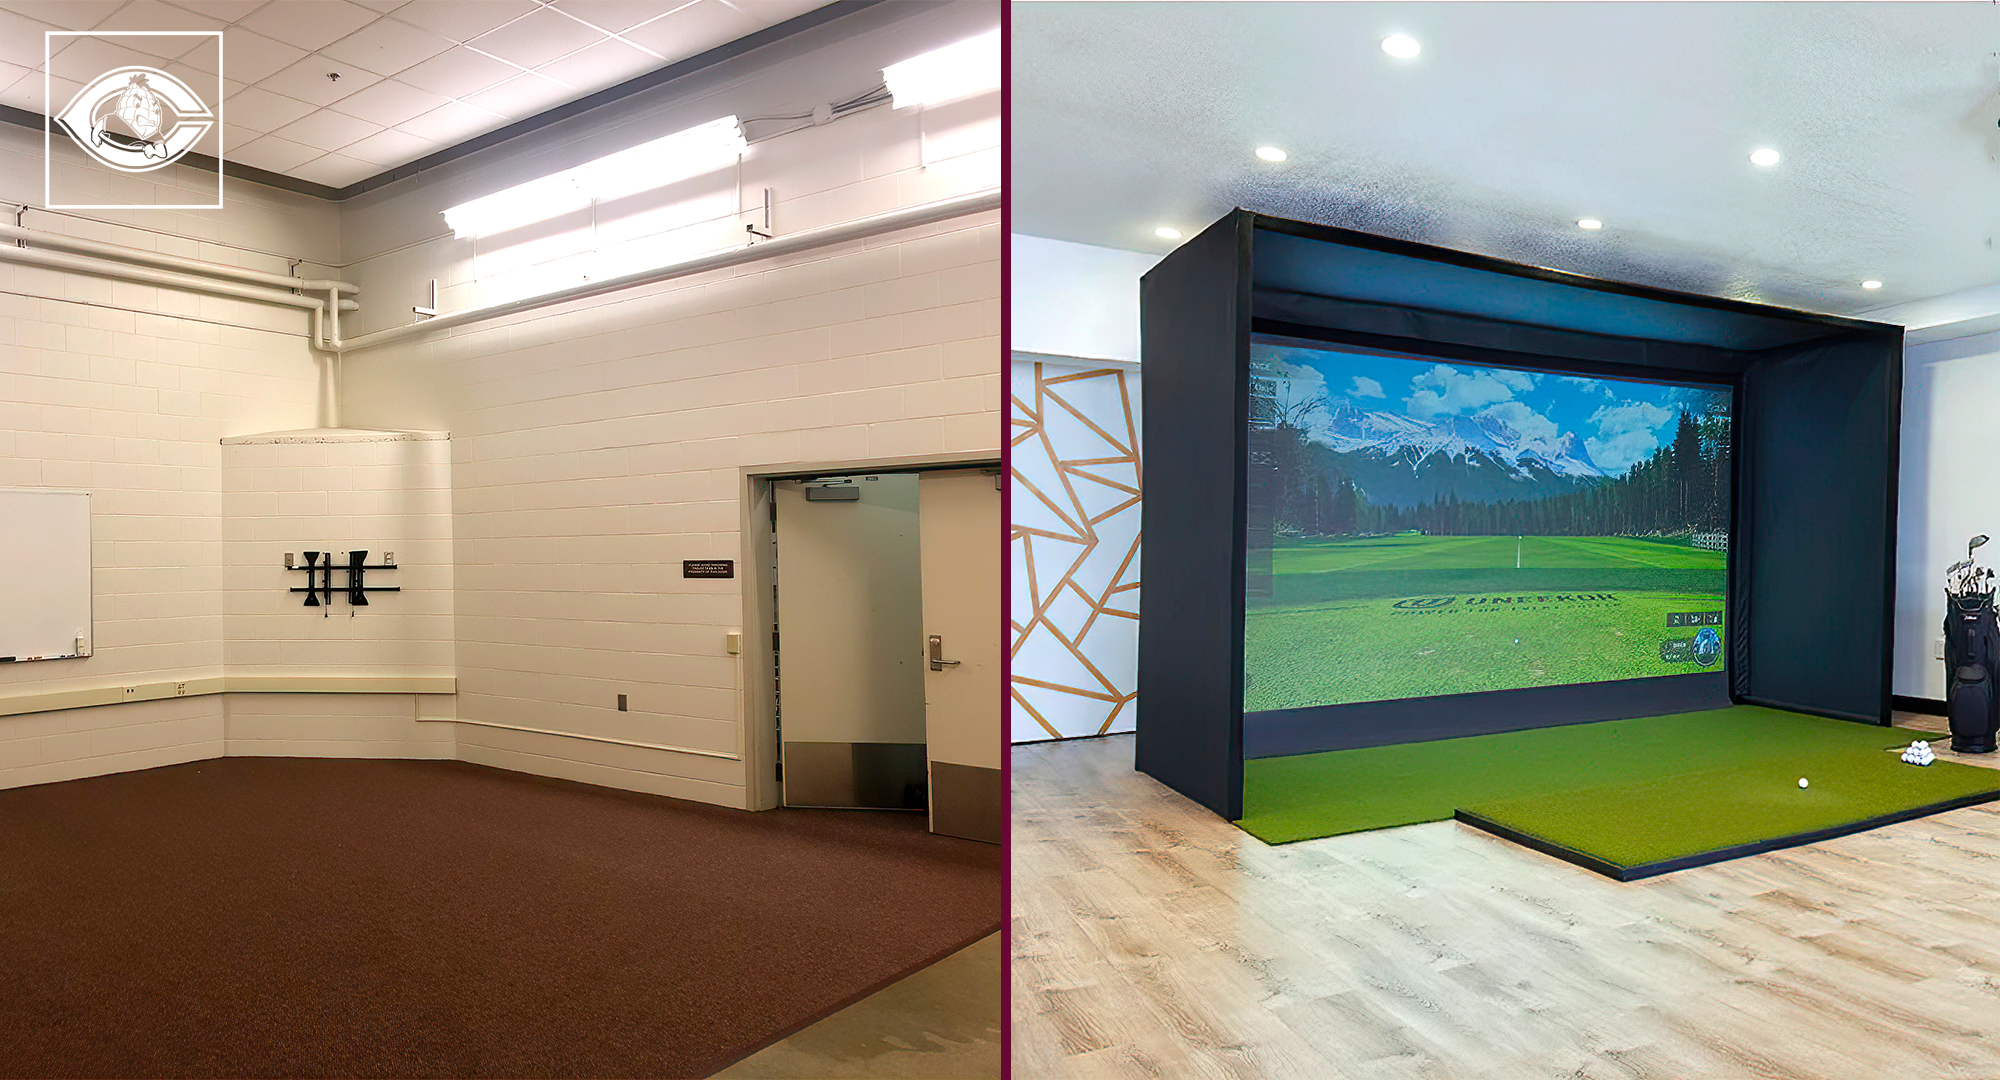 The new Concordia indoor performance center for golf will be housed in an unused space in Olson Forum (left) and feature the latest technology from Uneekor.